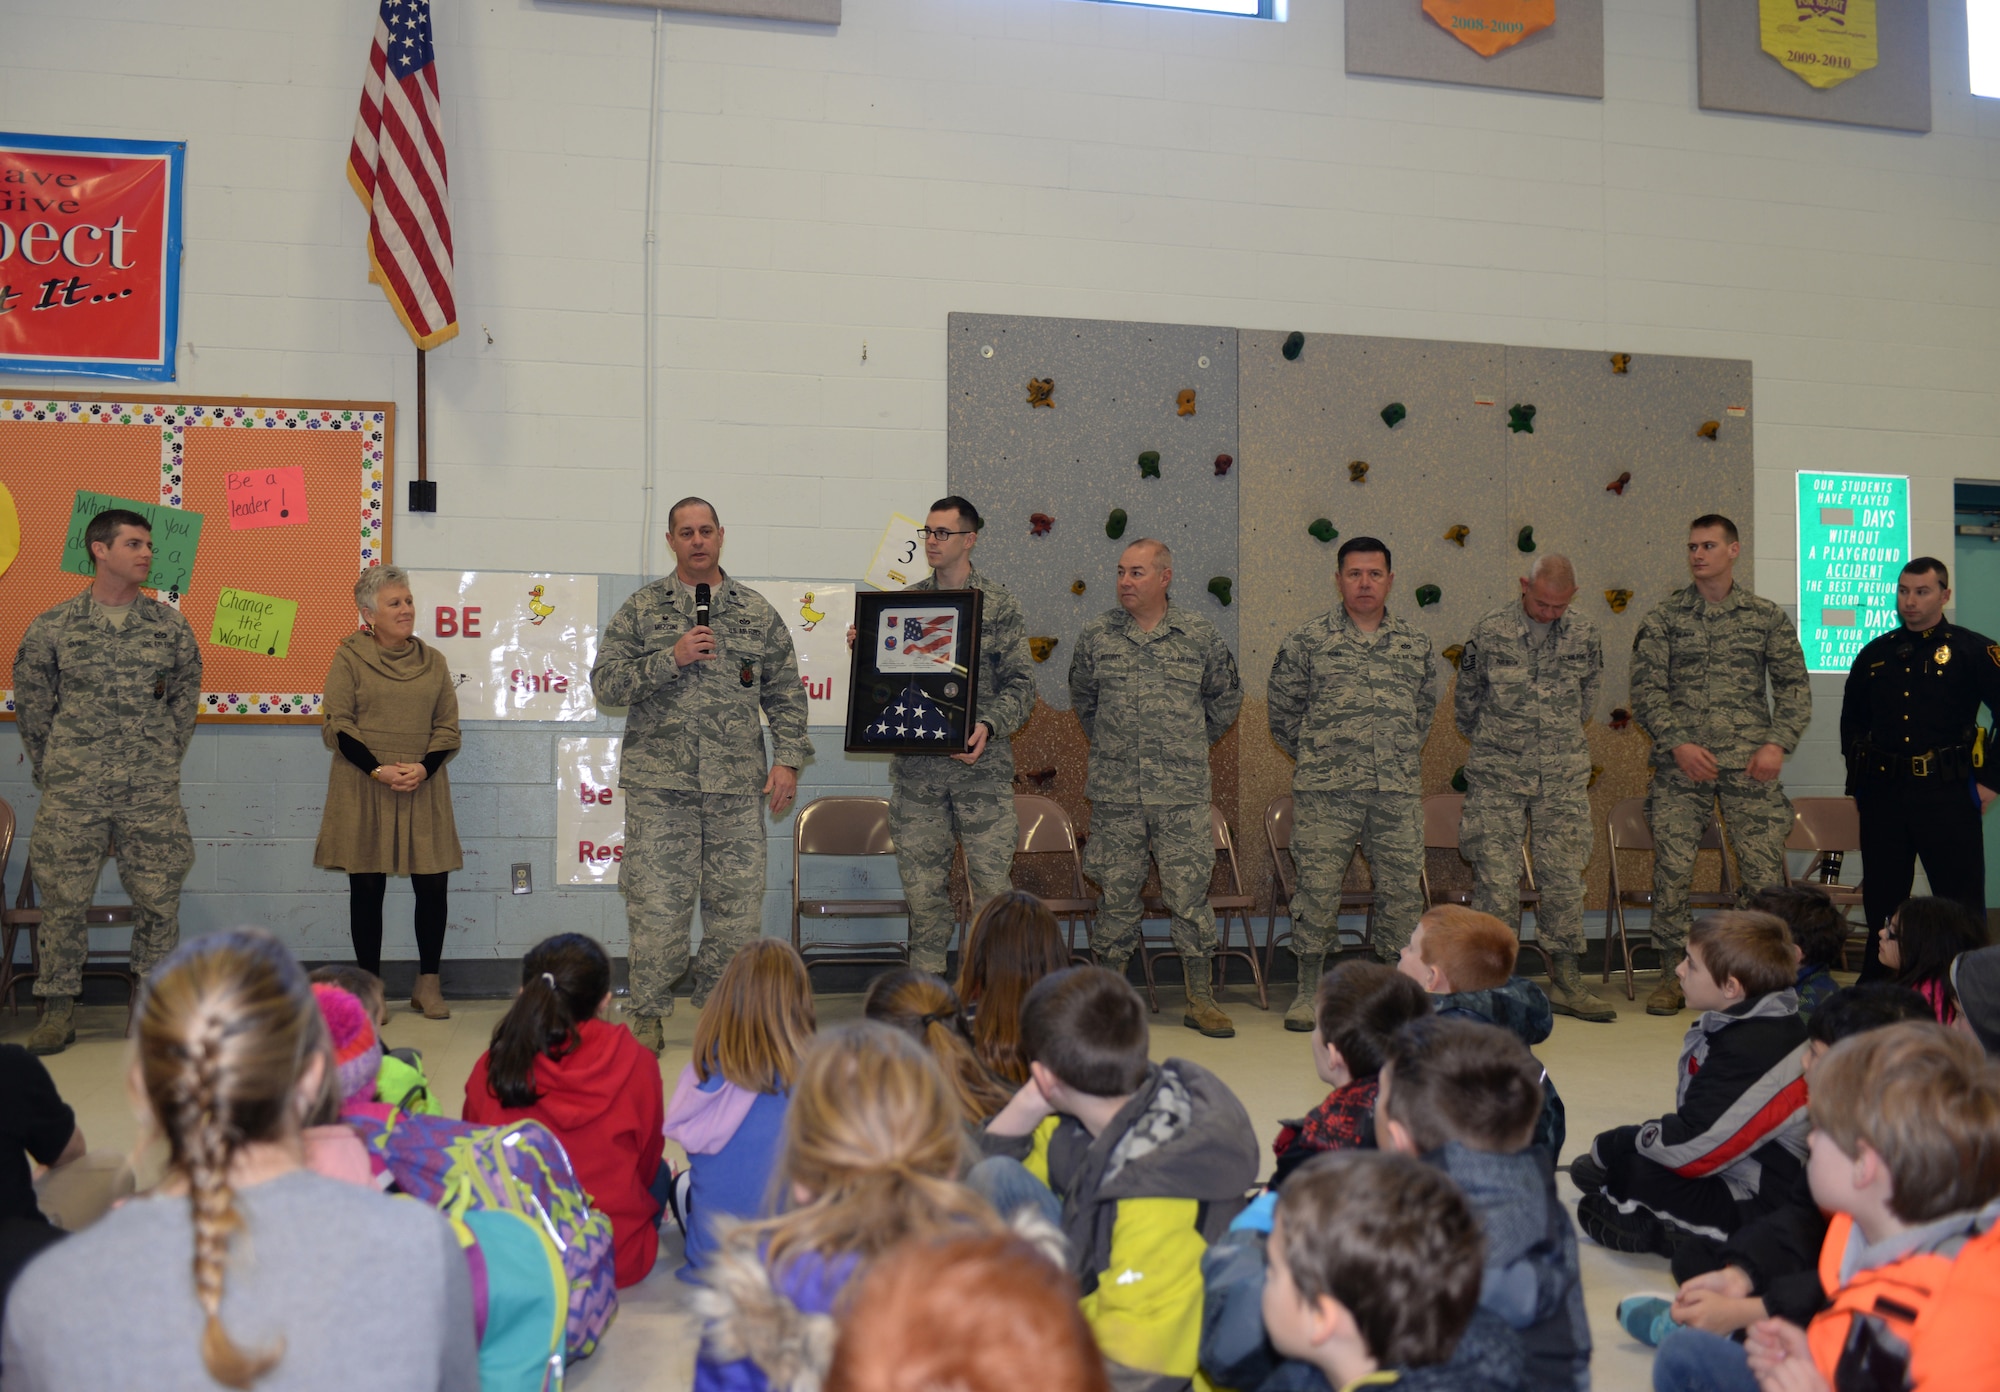 Lt. Col. Eugene R. Mozzoni, 157th Civil Engineering Squadron commander, thanks students of the McClelland Elementary School during a brief ceremony thanking the students for sending letters to the 157th Civil Engineering Squadron while they were deployed to the middle east over the past holiday season. March 27, 2018, Rochester, N.H.  The flag was flown over the country of Kuwait during Christmas while the squadron was deployed there. (N. H. Air National Guard photo by Master Sgt. Thomas Johnson)